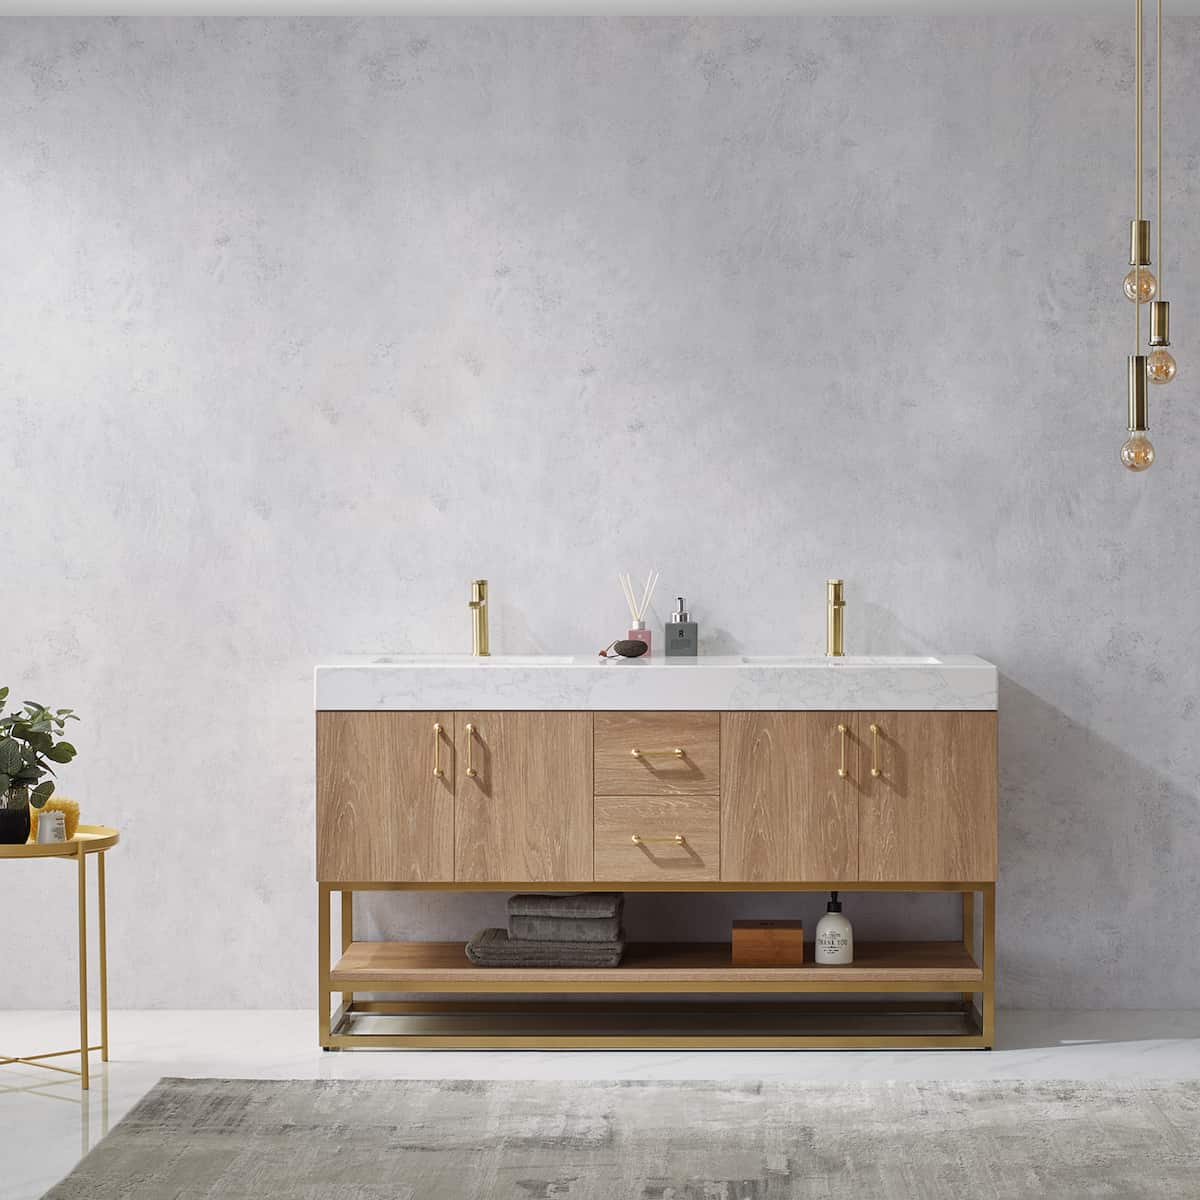 Vinnova Alistair 60 Inch Freestanding Double Vanity in North American Oak and Brushed Gold Frame with White Grain Stone Countertop Without Mirror in Bathroom 789060-NO-GW-NM